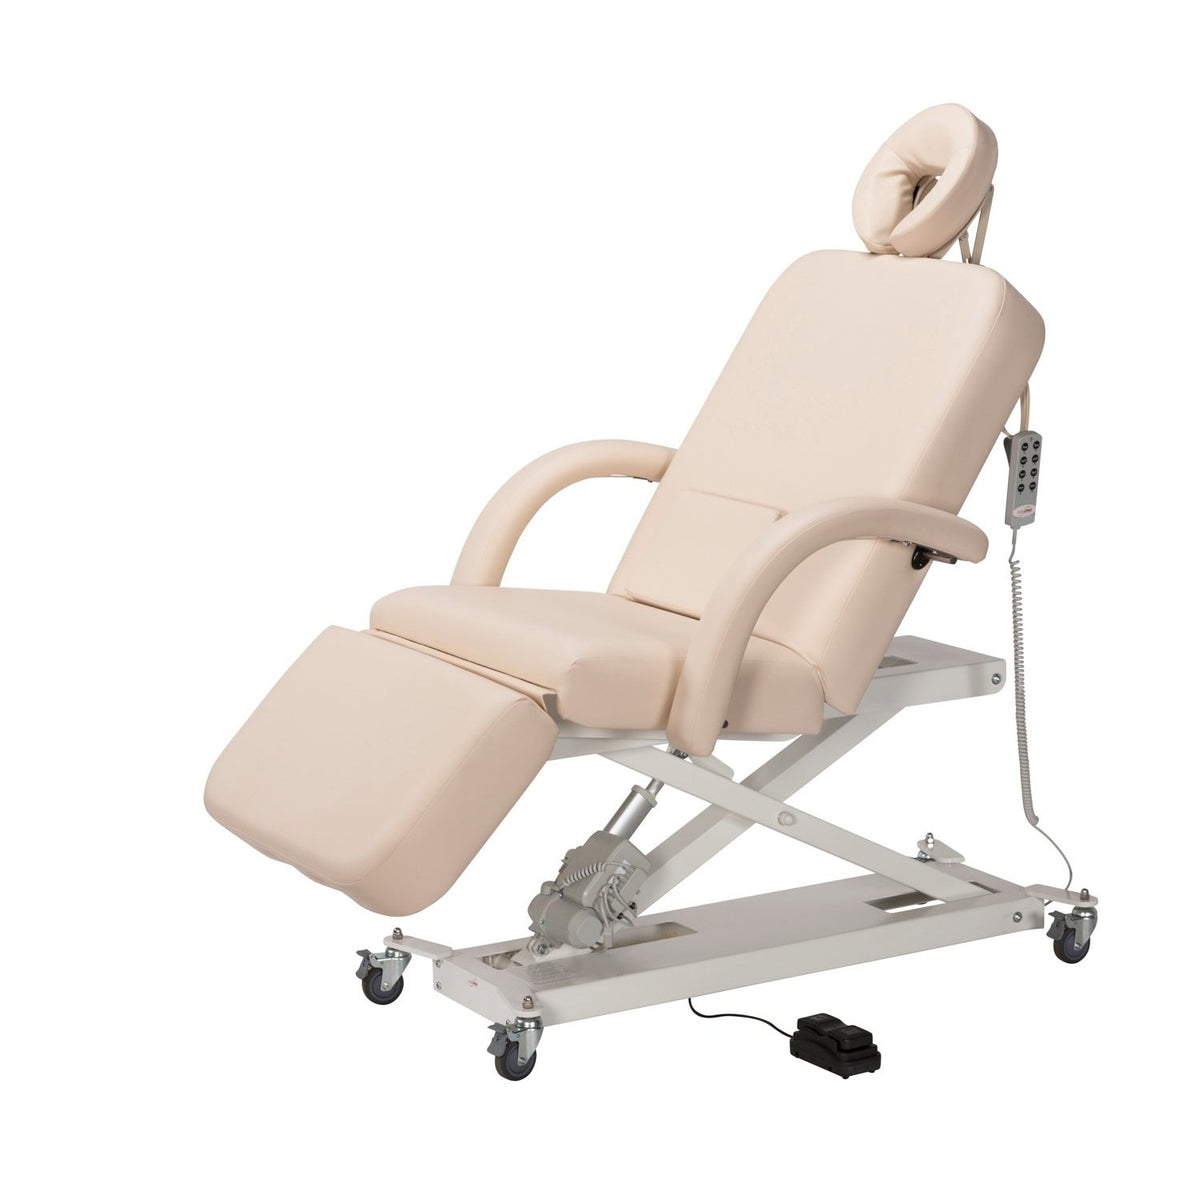 Equipro Equipro Infinity Electric Therapeutic Massage Facial Bed Massage &amp; Treatment Table - ChairsThatGive